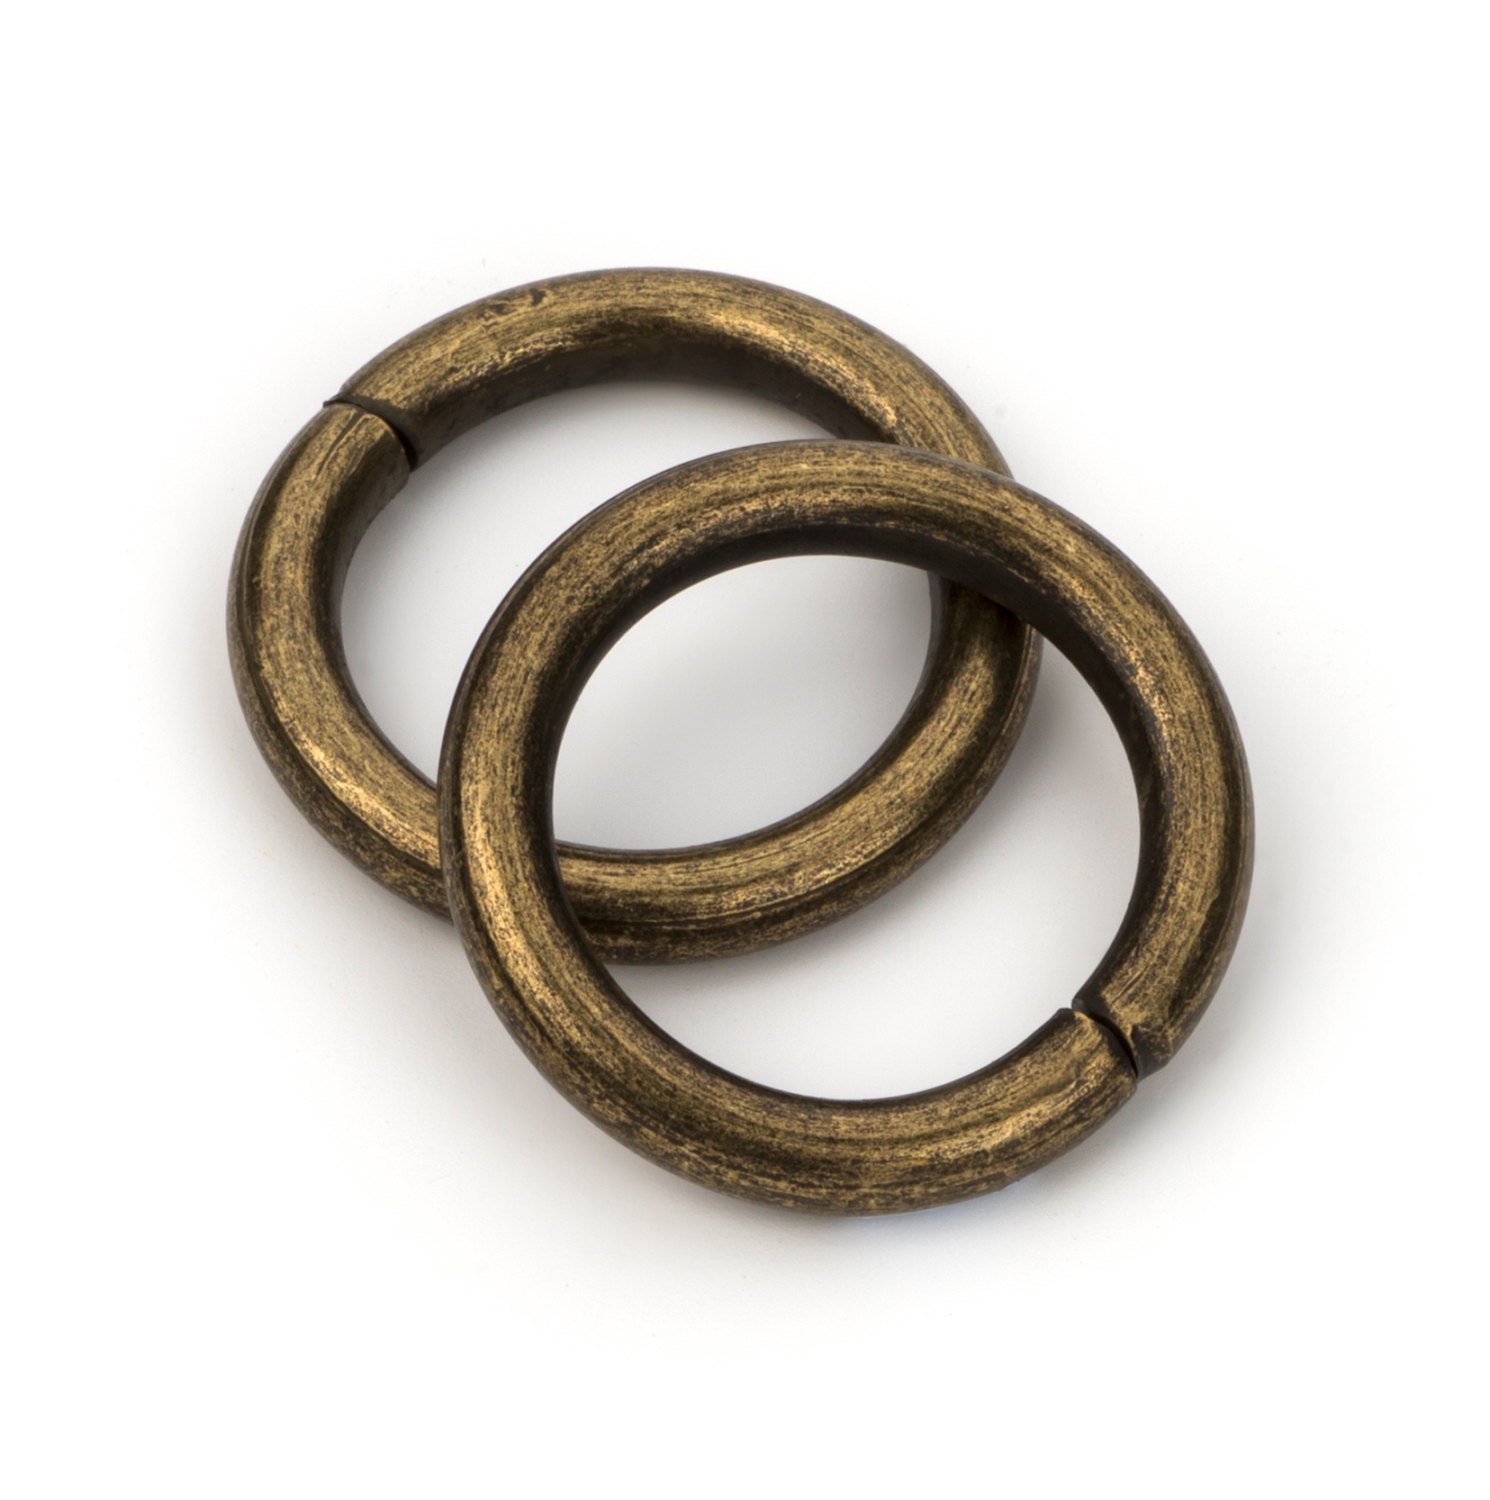 10pcs 5/8 Metal O Rings Non Welded Antique Brass